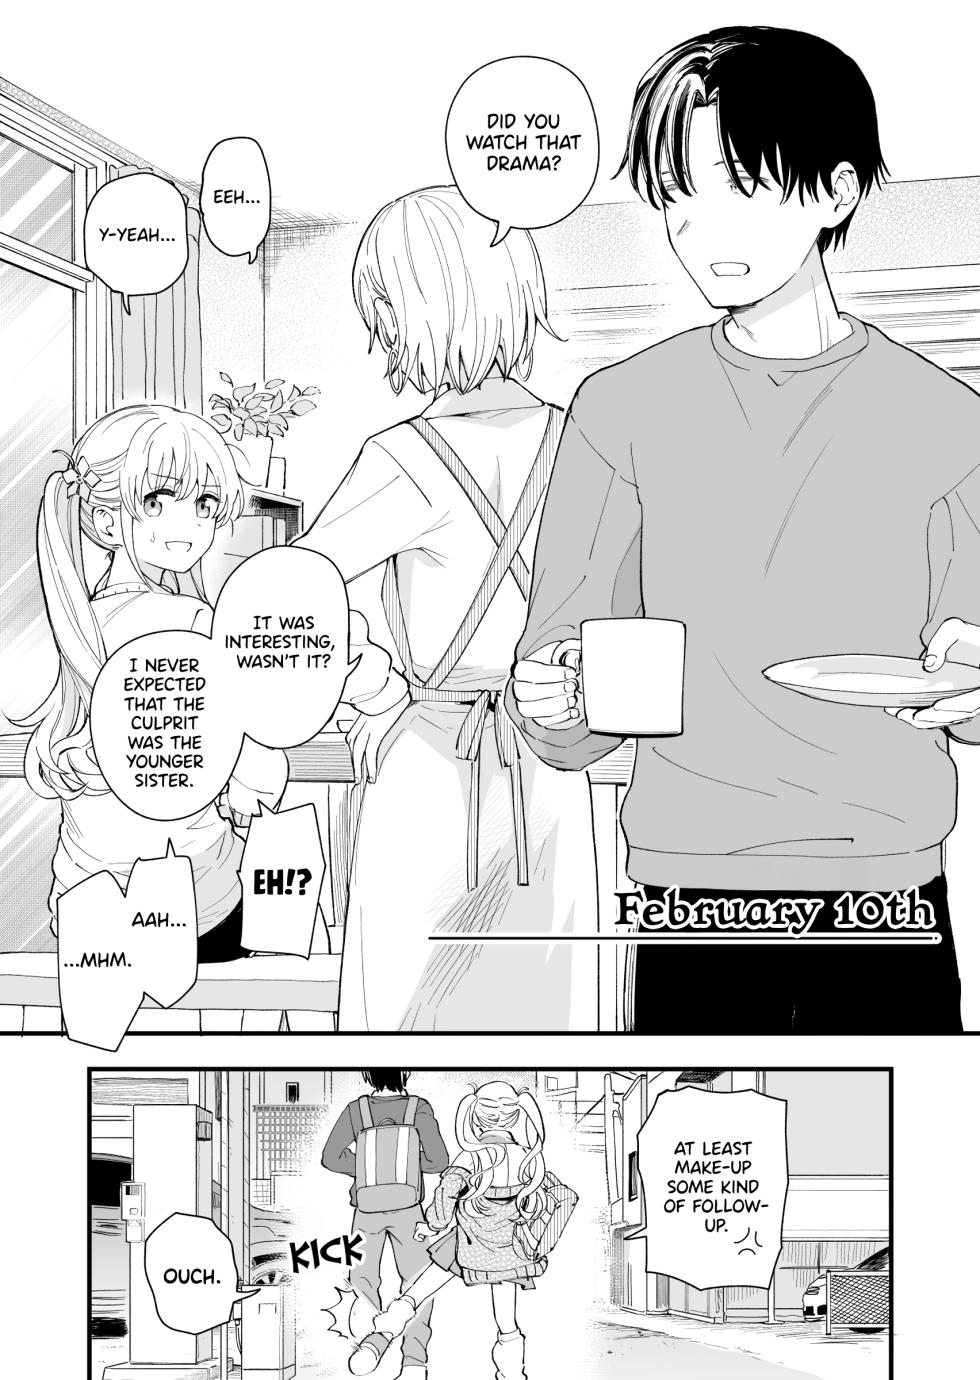 [Hiro no Ke (Hiro Hirono)] Sasete Kureru 3 no Gimai | A Younger Stepsister Who Only Has Sex With Me on Days That are Divisible by 3 or on Days That Include The Number 3. [English] [HeatManga] - Page 12